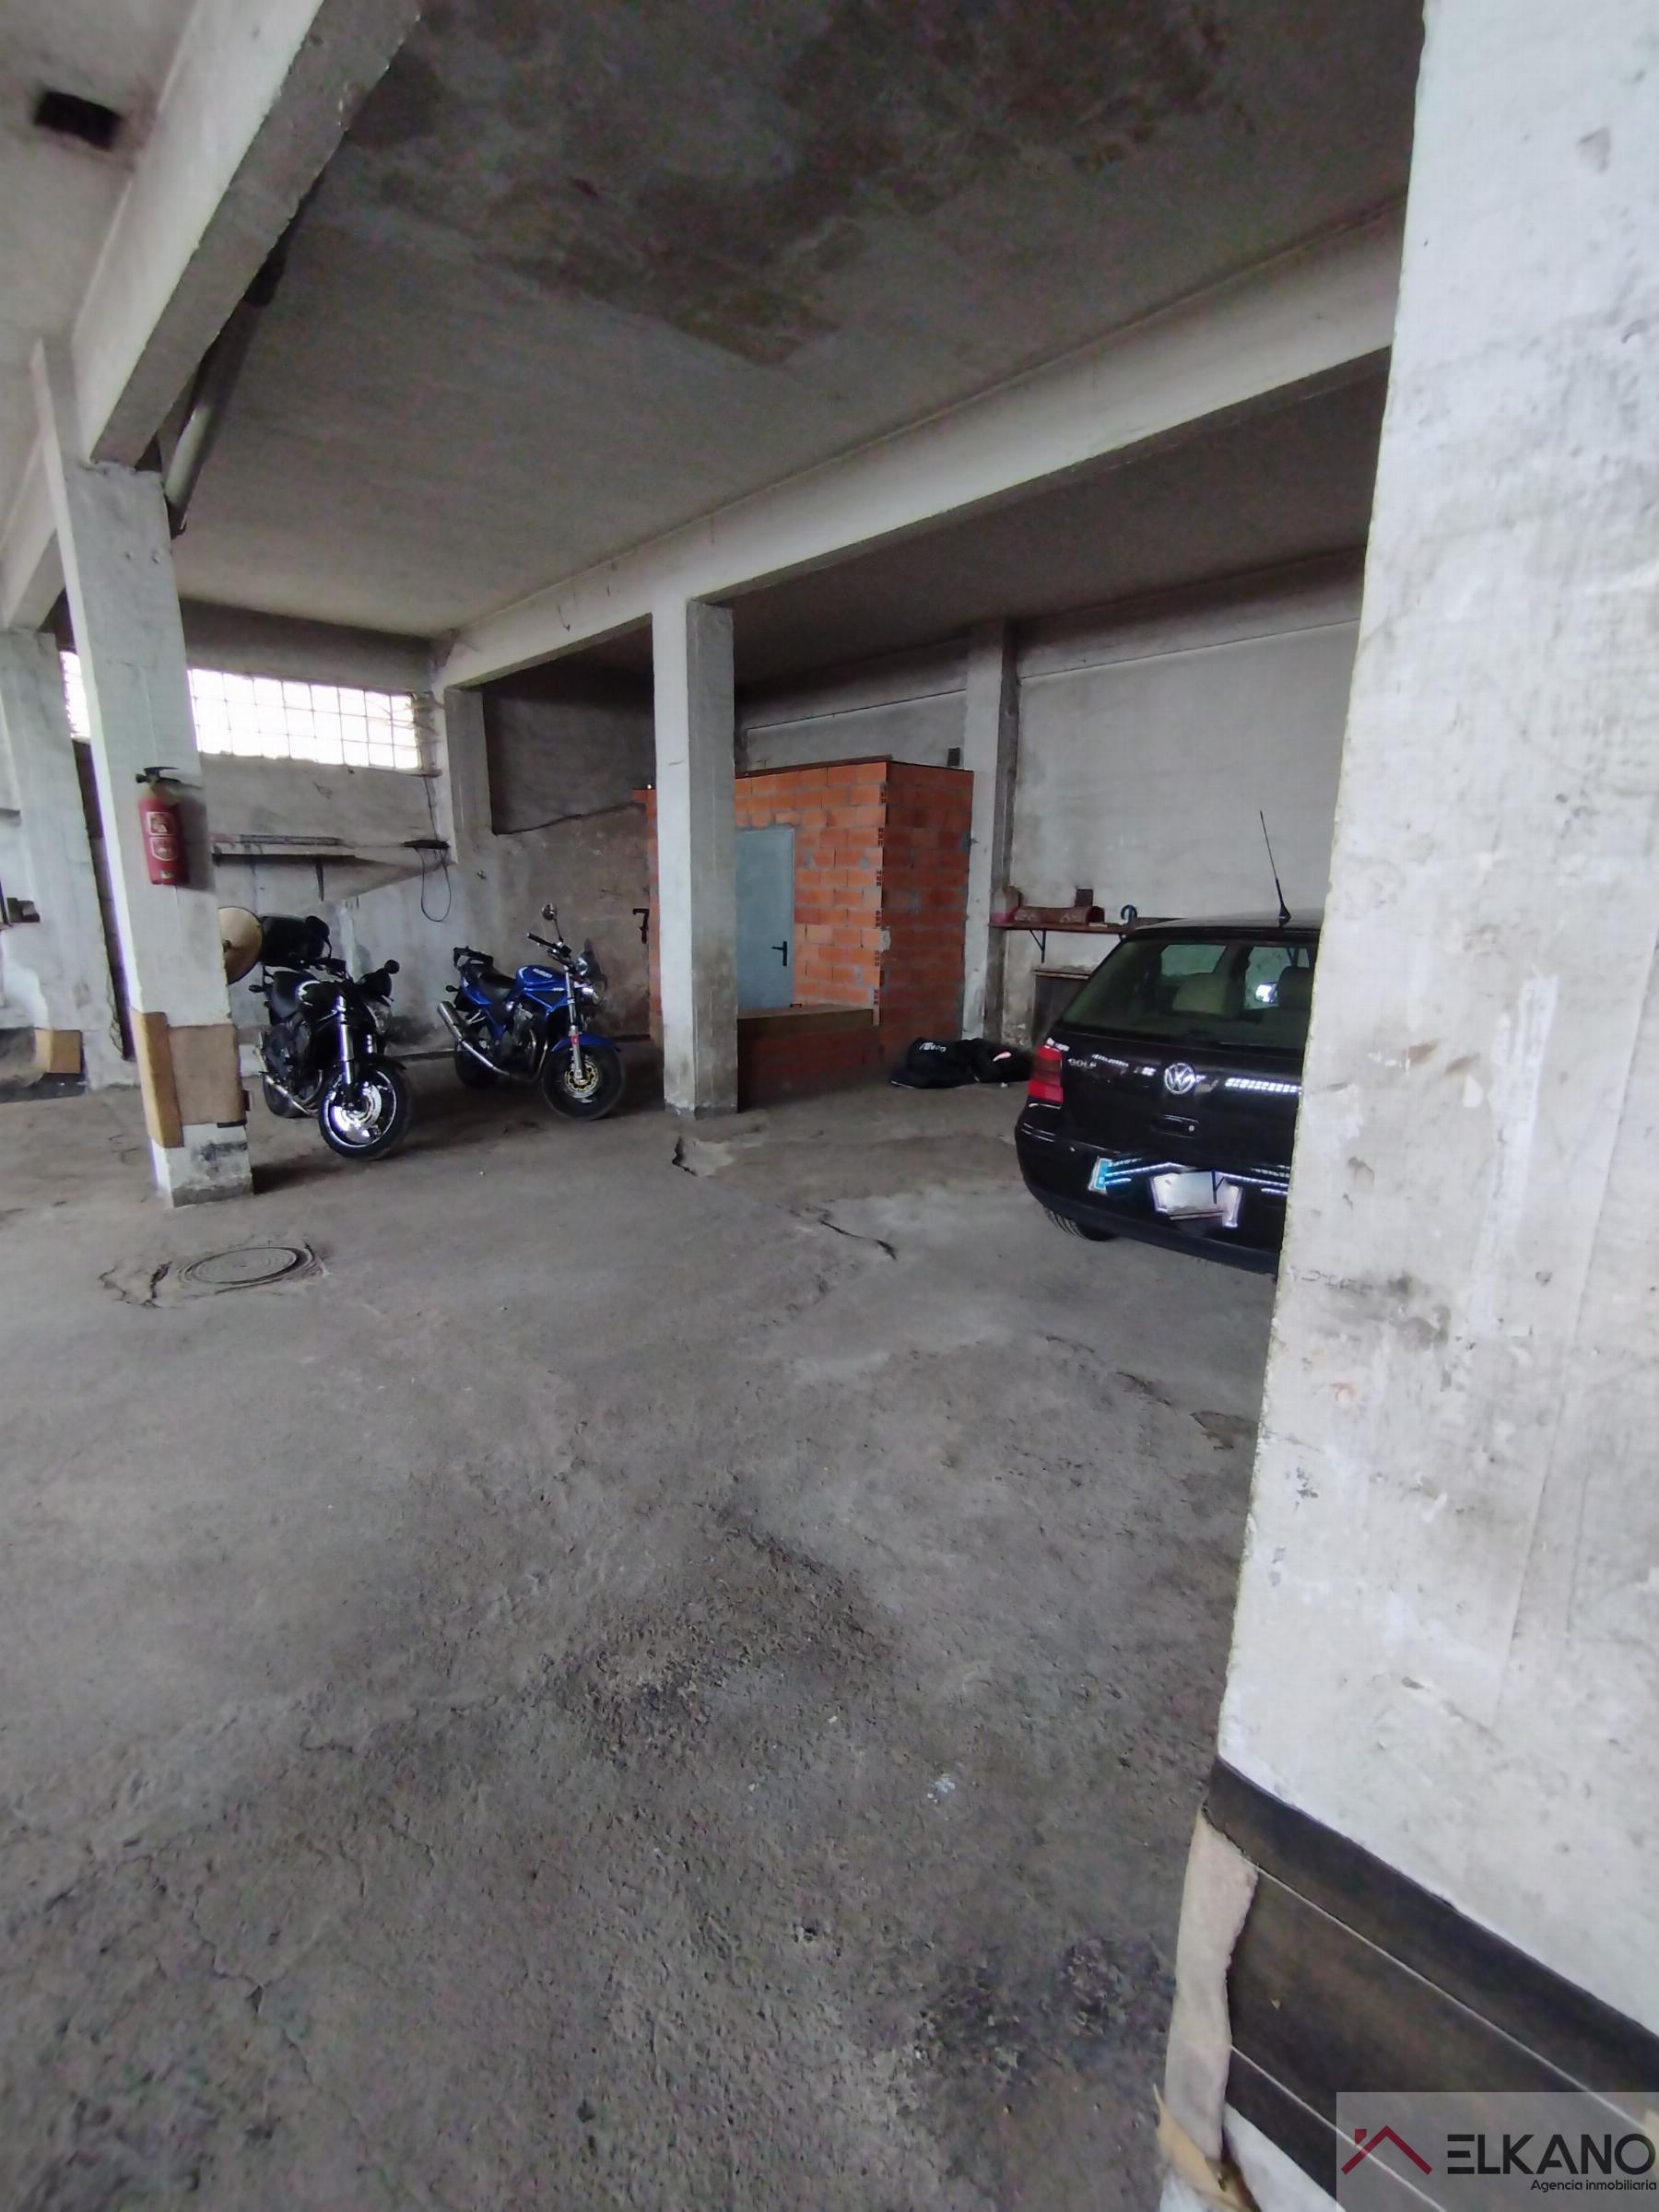 For sale of garage in Bilbao